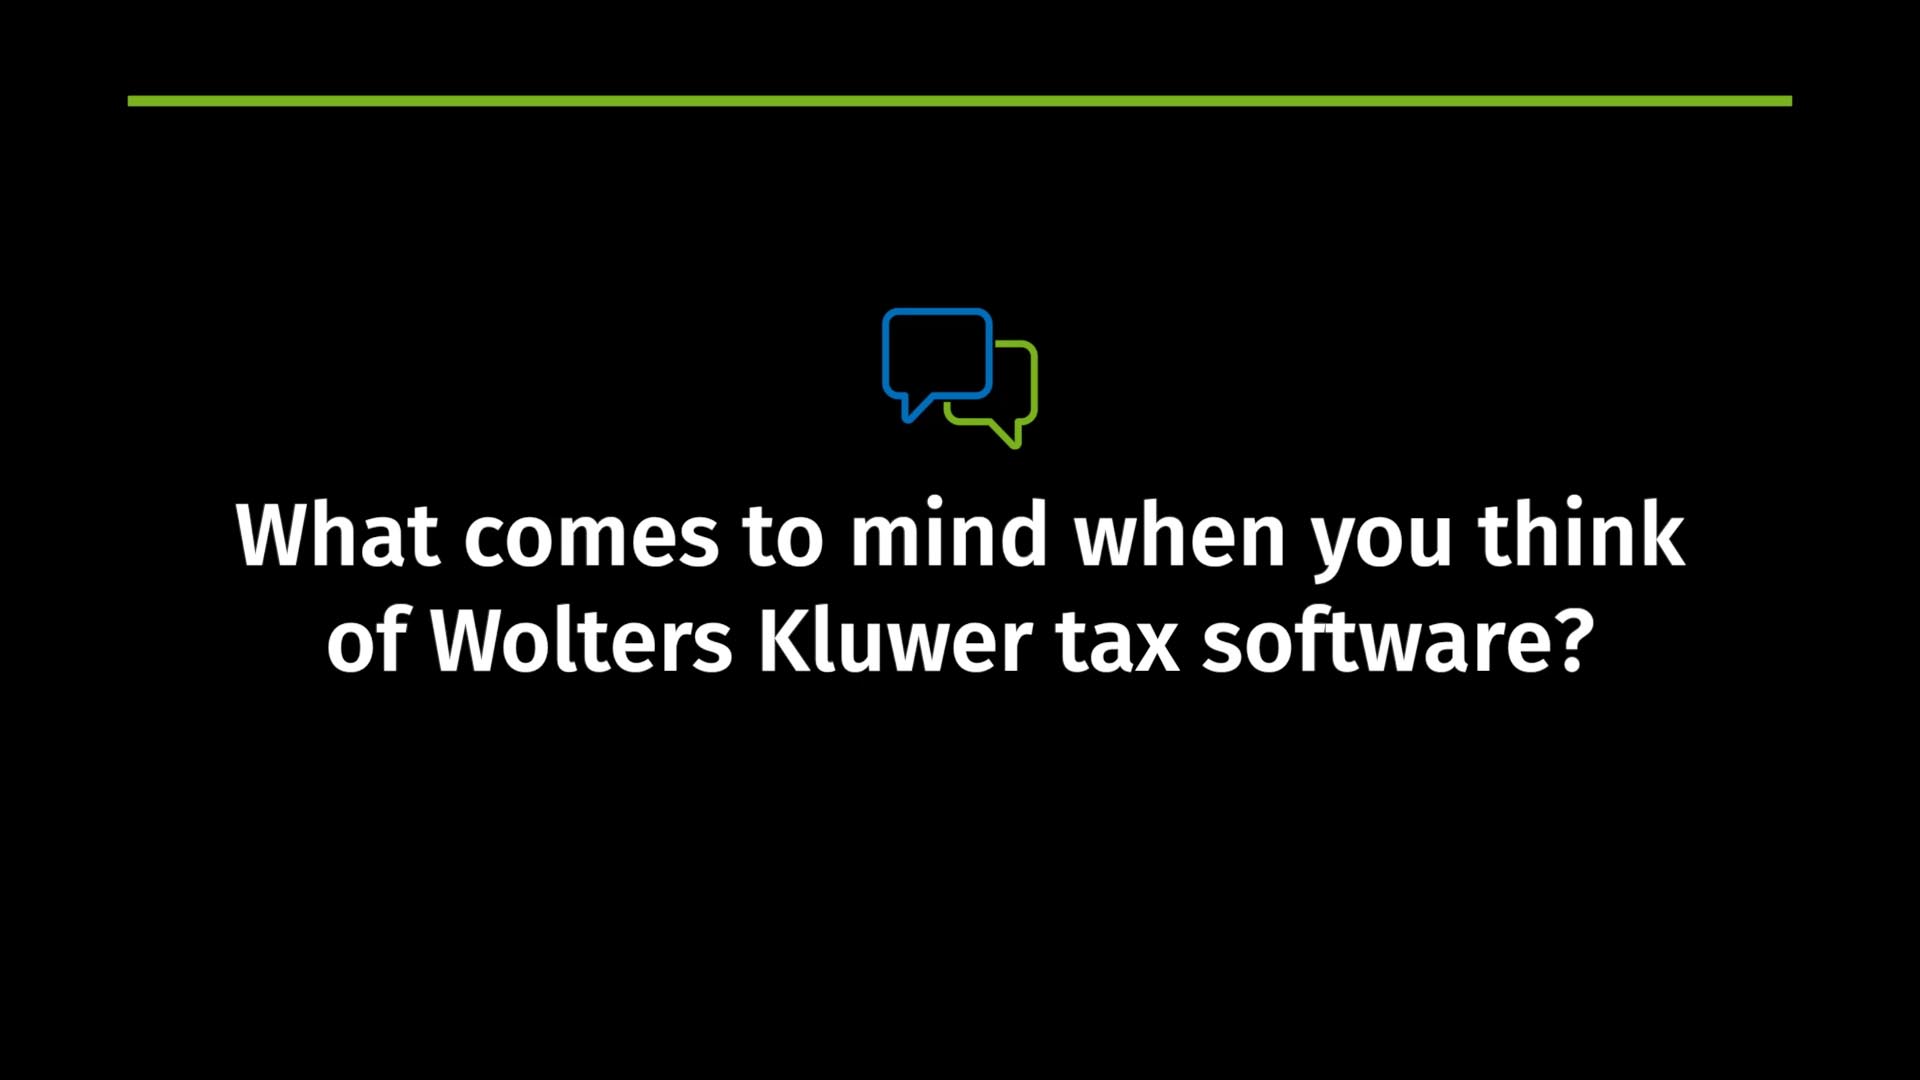 What comes to mind when you think of Wolters Kluwer tax software?